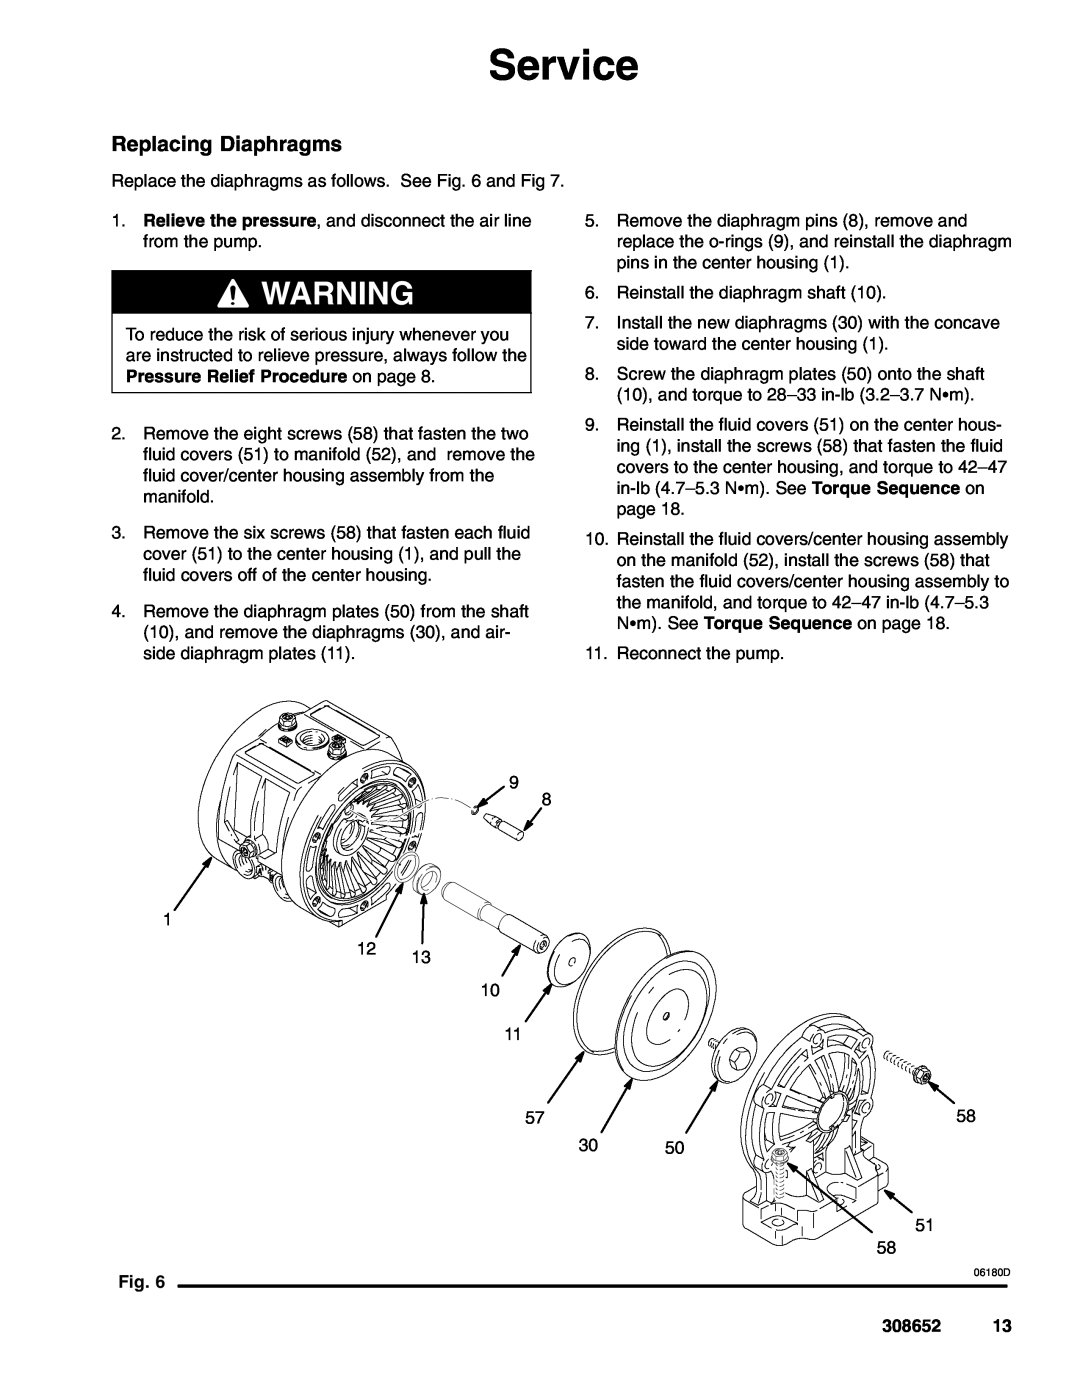 Graco 308652Y important safety instructions Replacing Diaphragms, Service, 06180D 